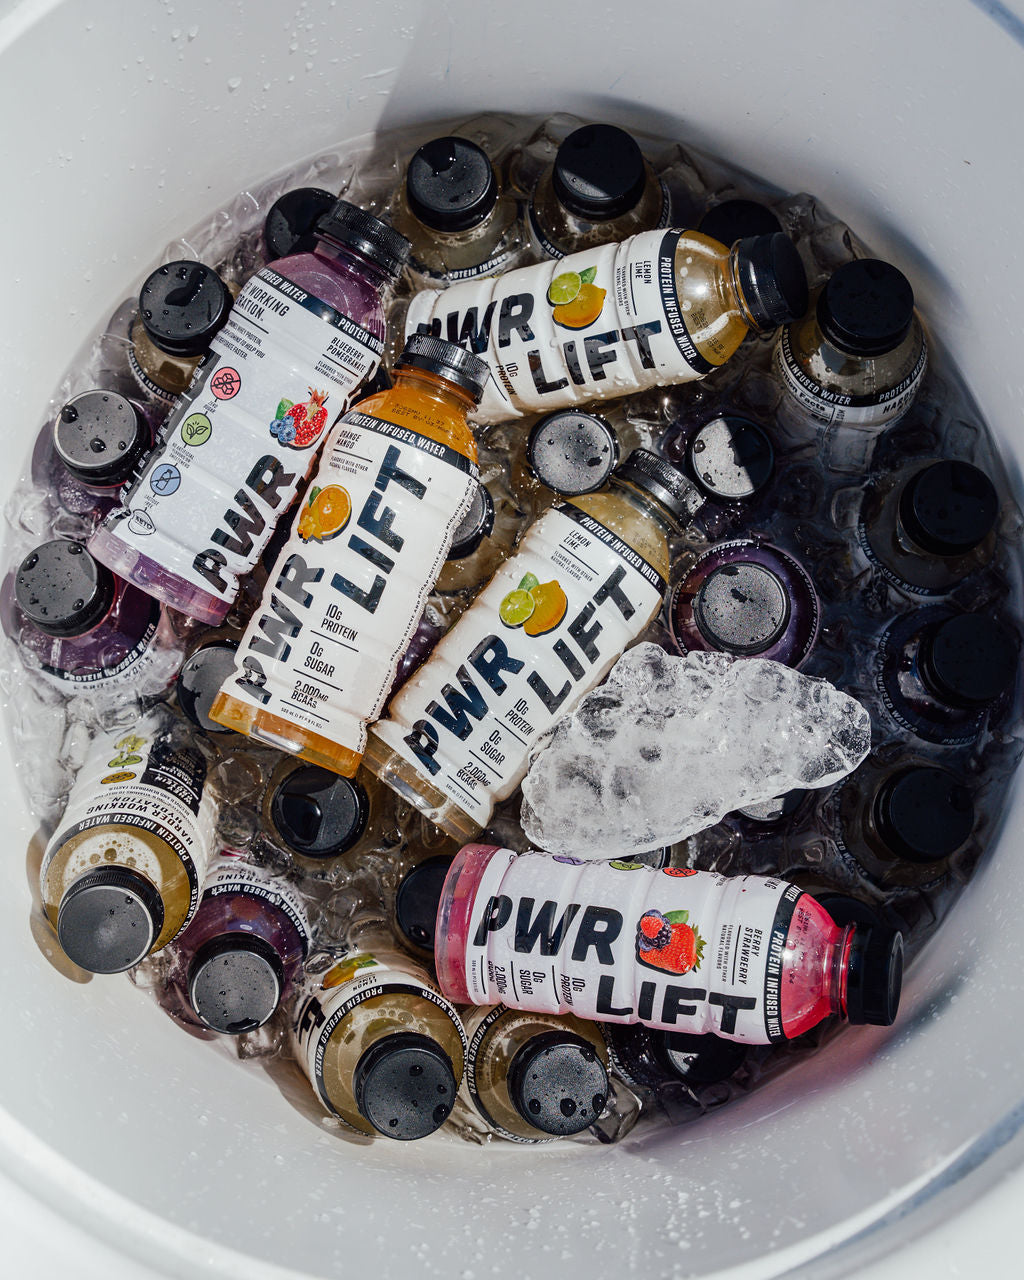 A bucket of PWR lift on ice 